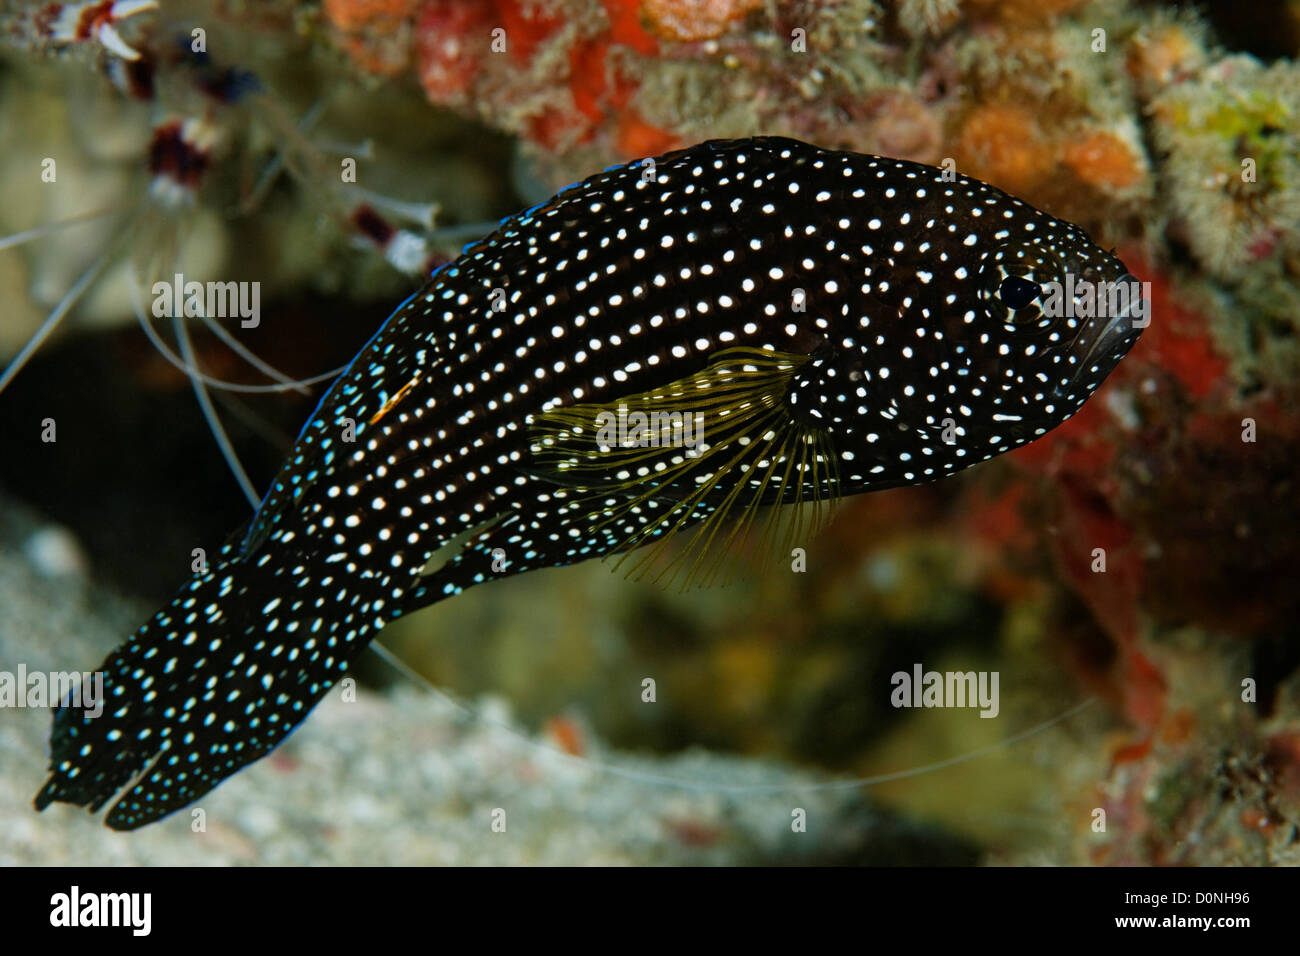 A comet (Calloplesiops altivelis), a variety of longfin, in the Maldives. Stock Photo